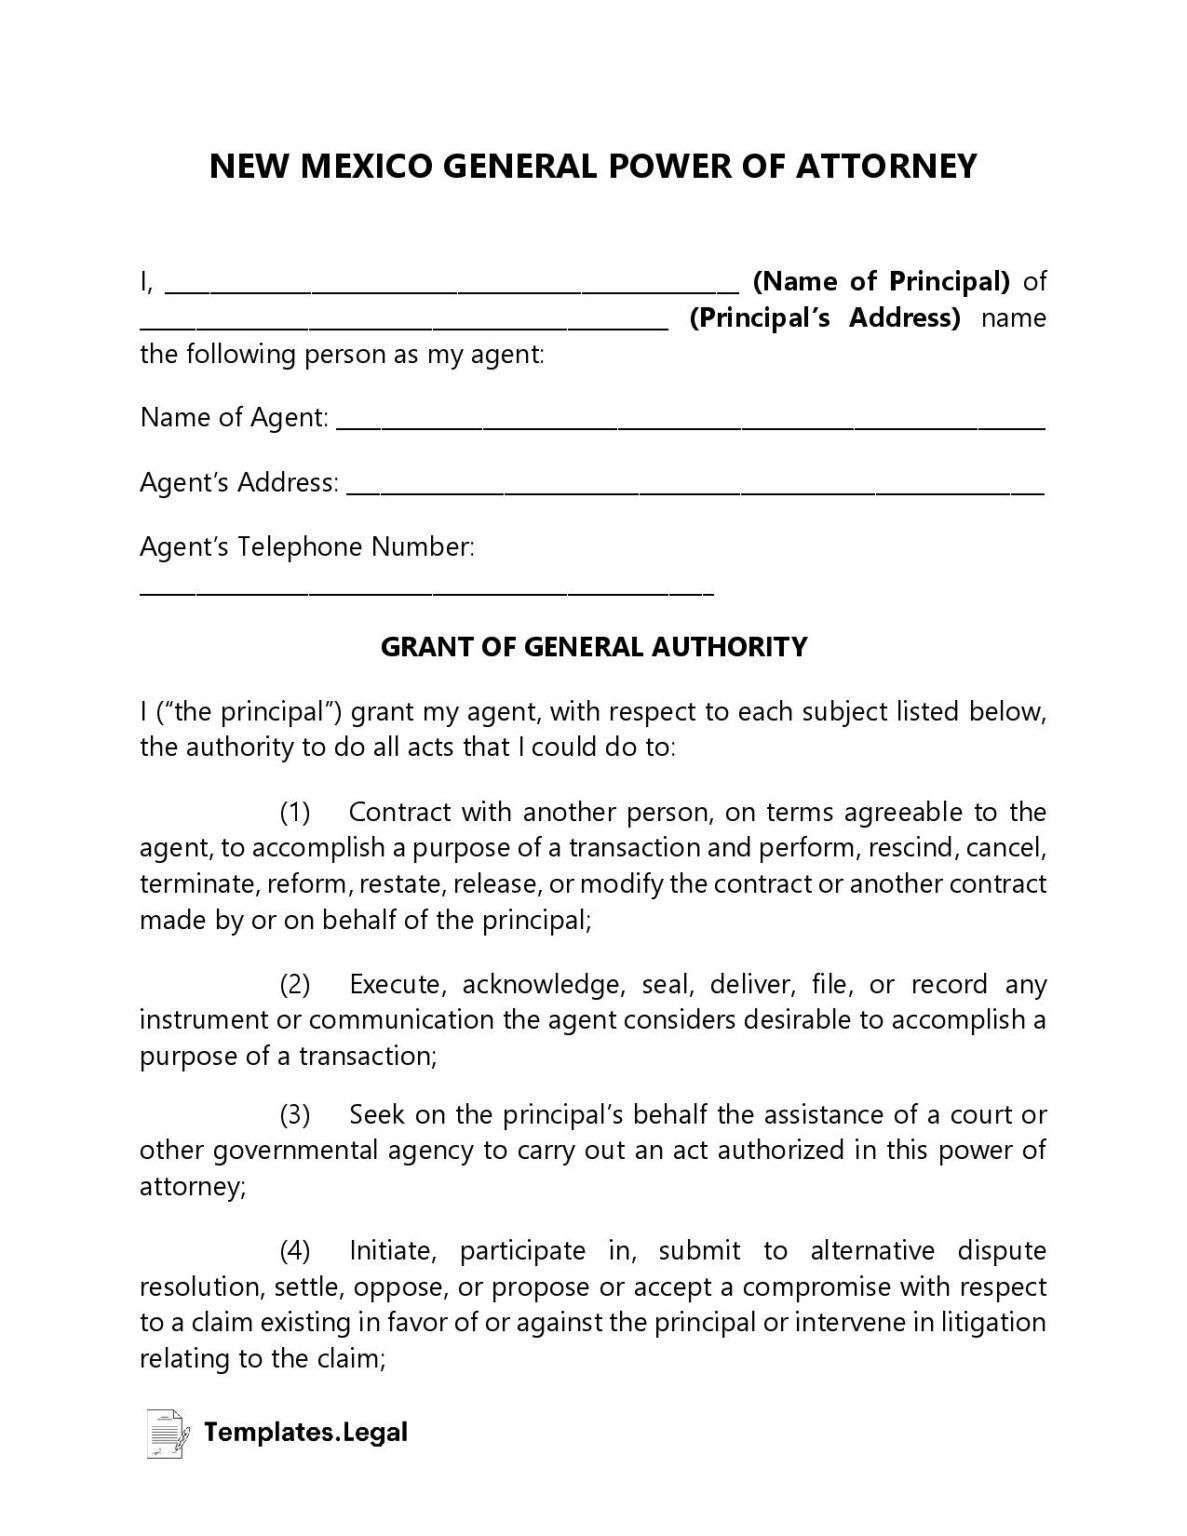 New Mexico Power of Attorney Templates (Free) [Word, PDF & ODT]